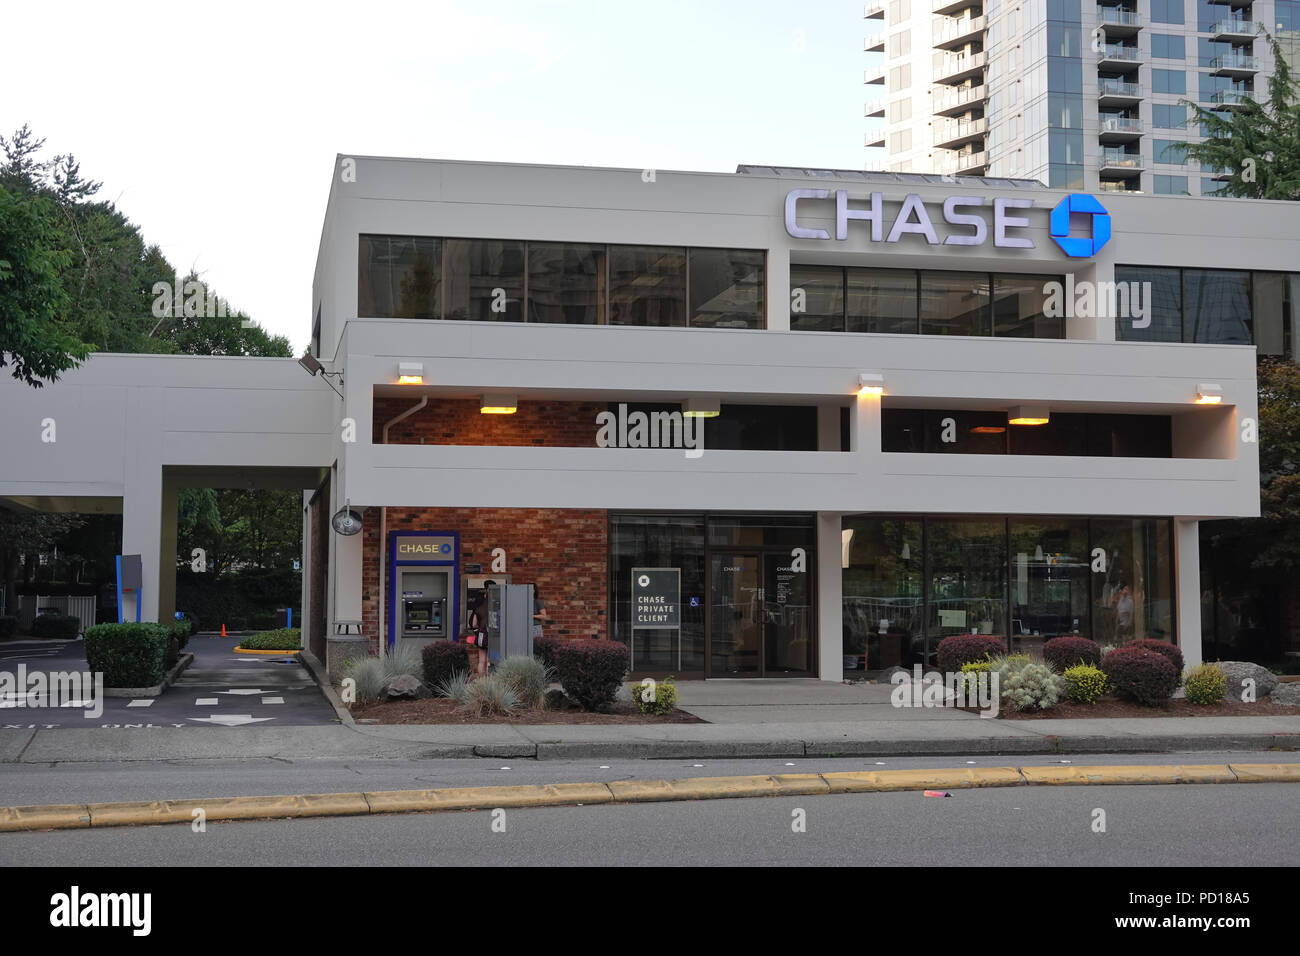 Chase Bank building, ATM and drive-thru in downtown Bellevue, WA, USA; August 2018 Stock Photo